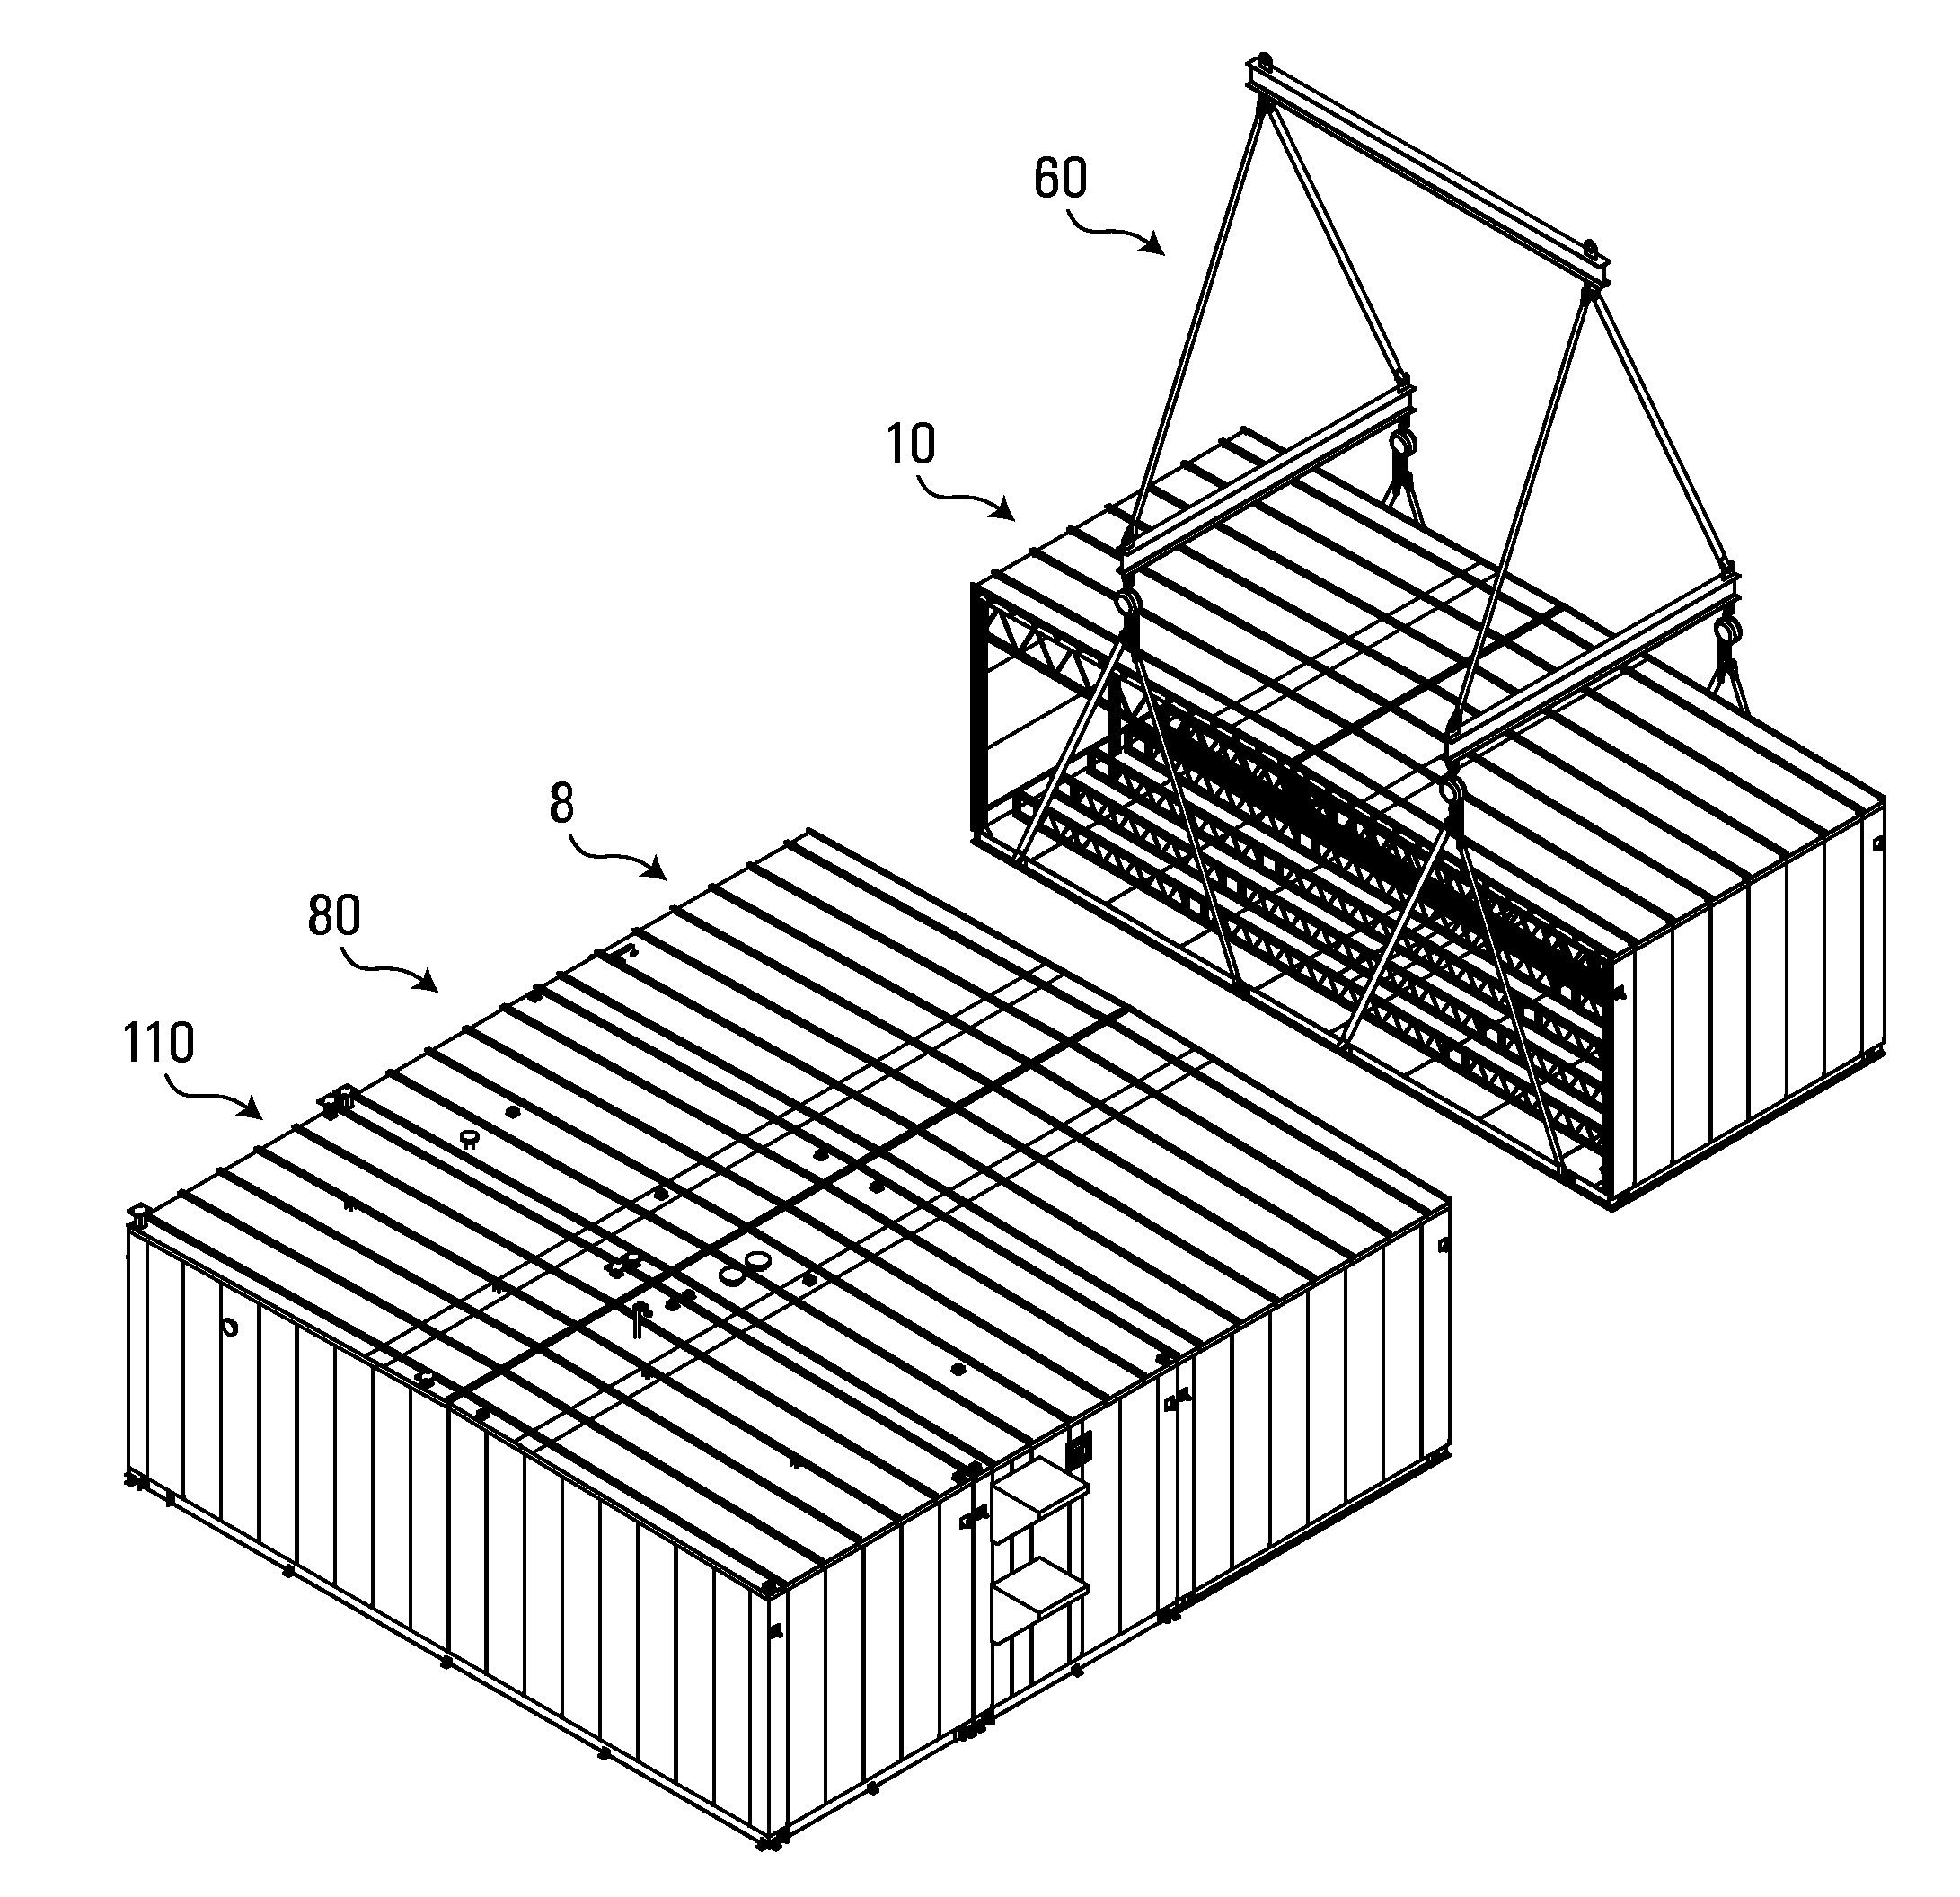 Modular building system and method